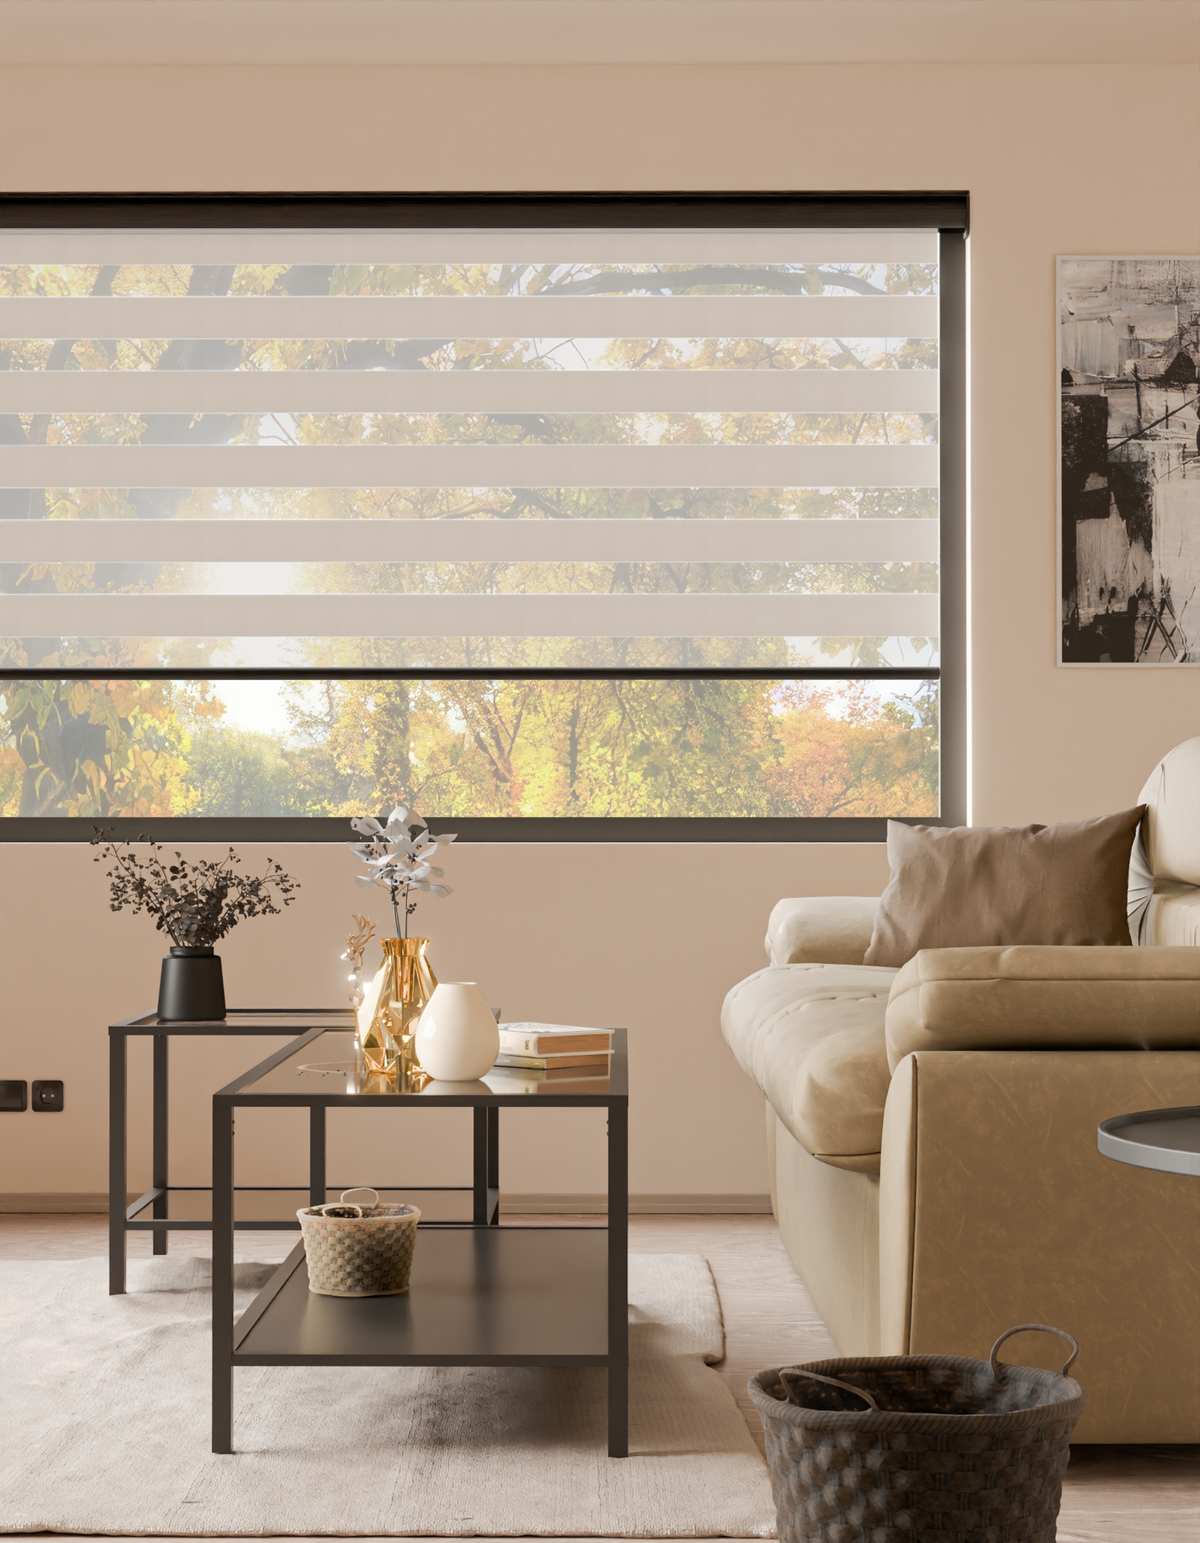 Blackout Pitch Cream - Day and Night Blinds